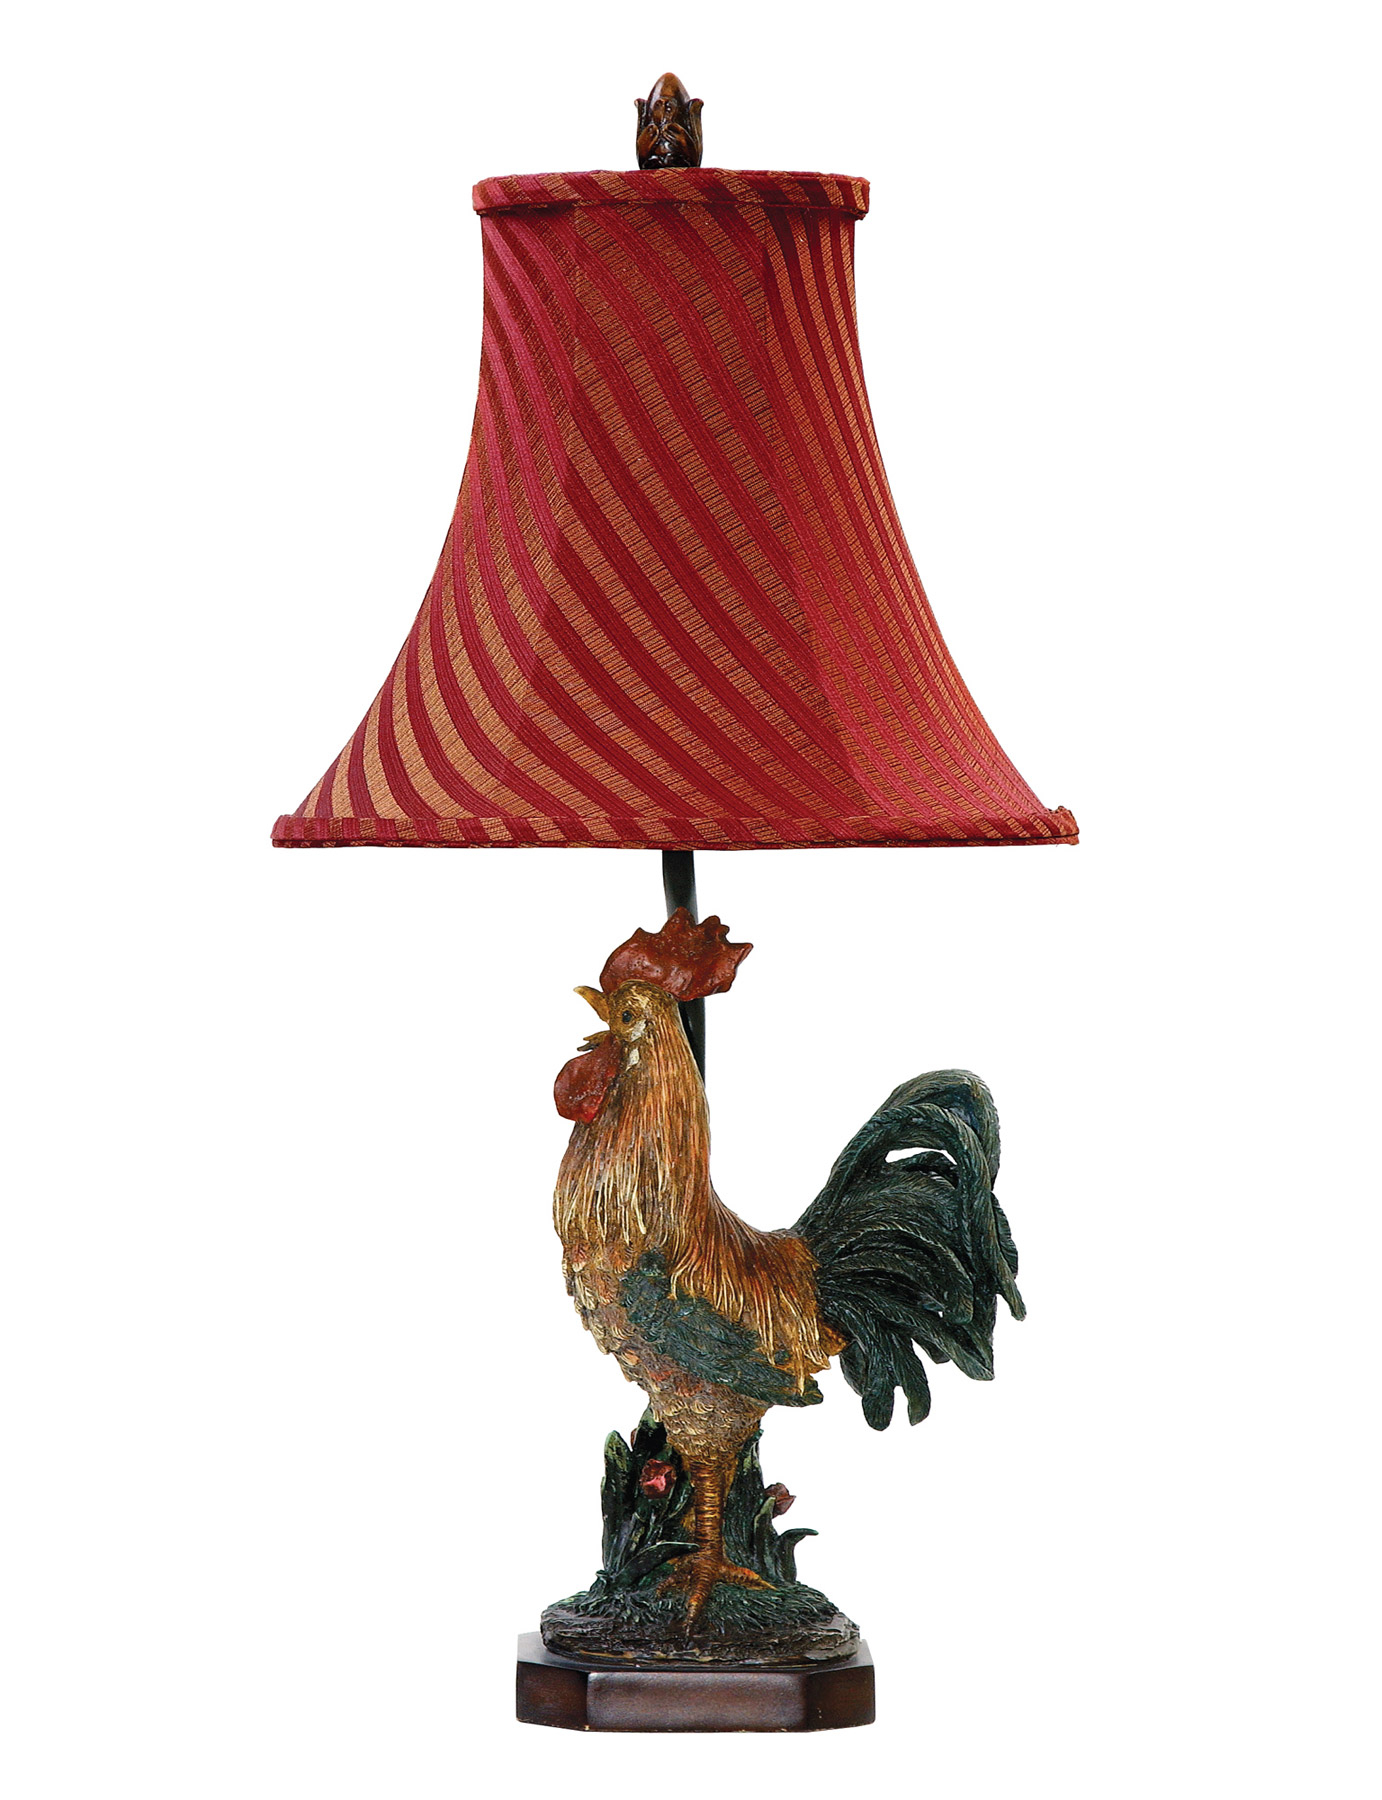 Crowing Rooster 24.25" H Table Lamp with Bell Shade